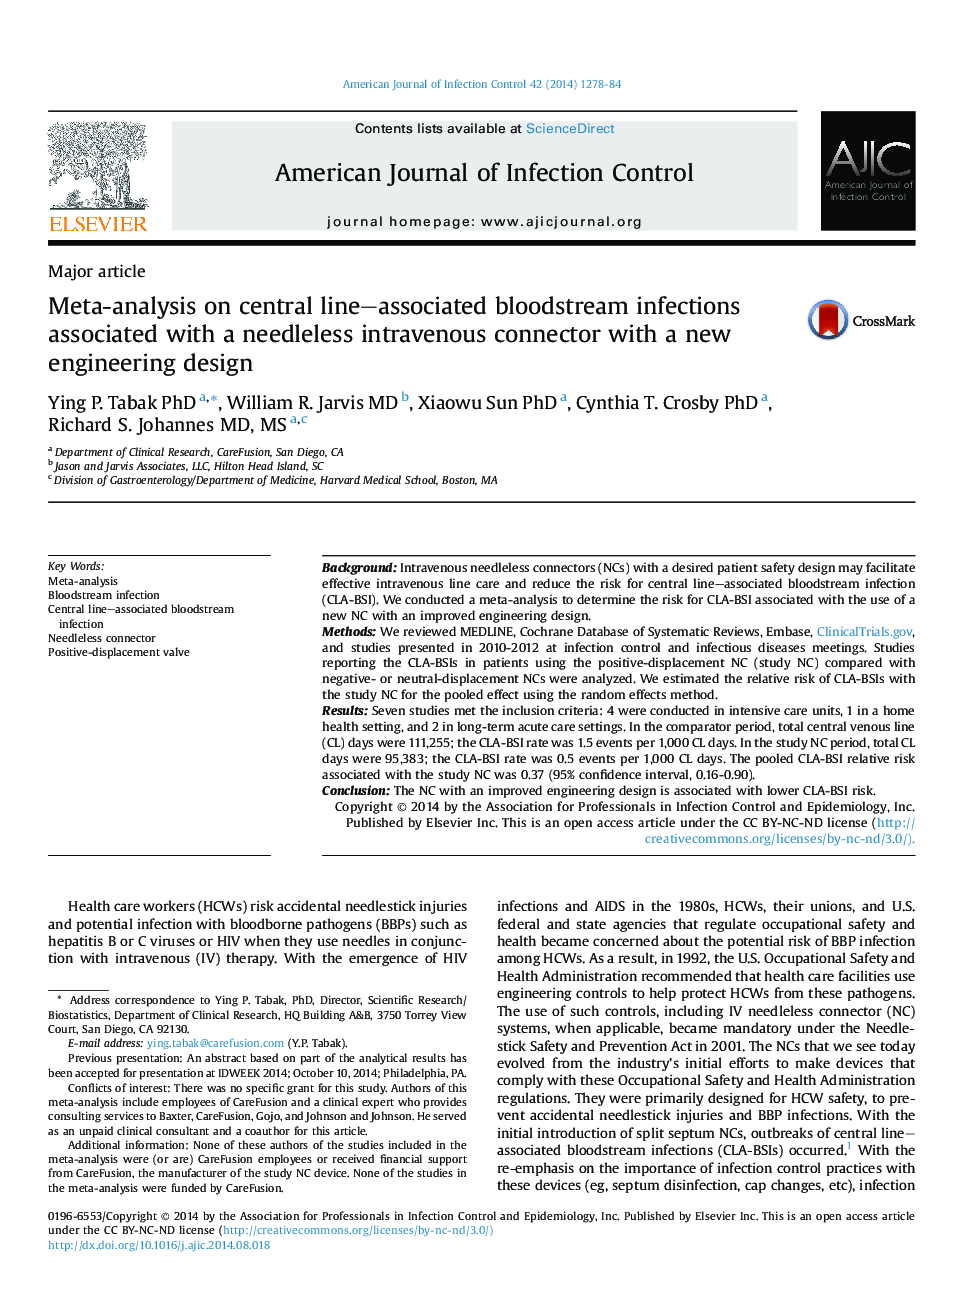 Meta-analysis on central line-associated bloodstream infections associated with a needleless intravenous connector with a new engineering design